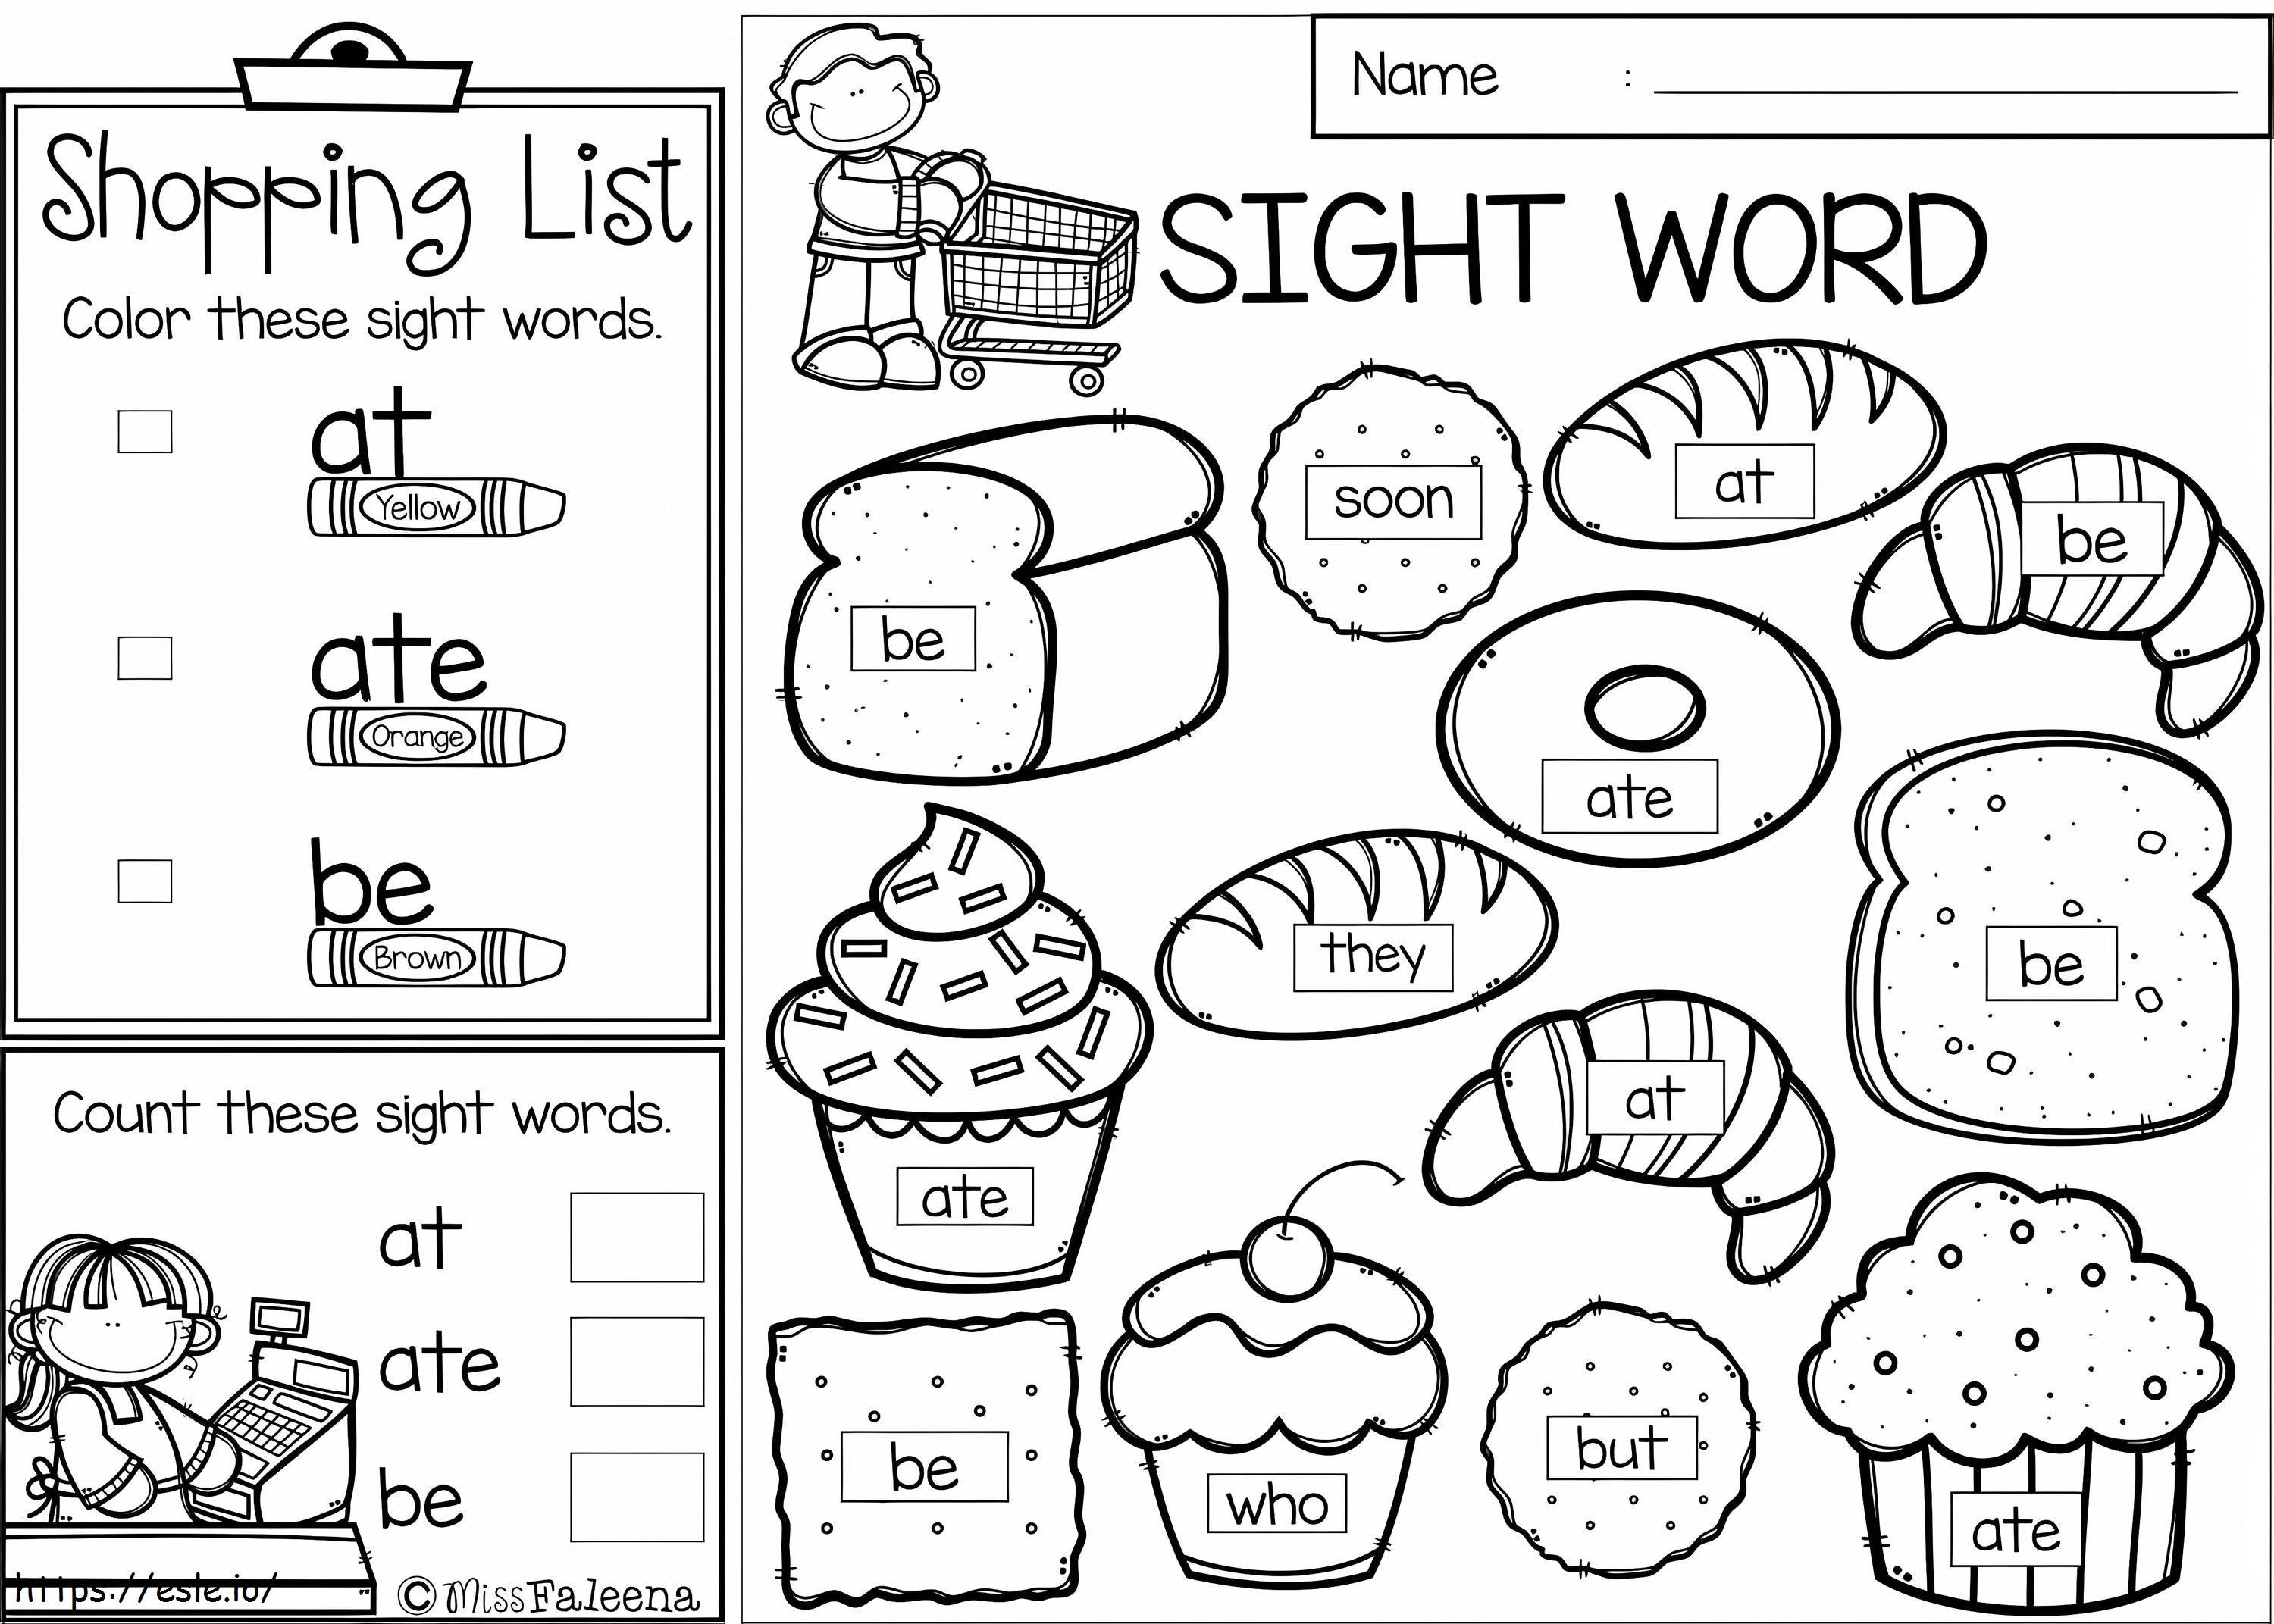 Shopping List Sight Words coloring page